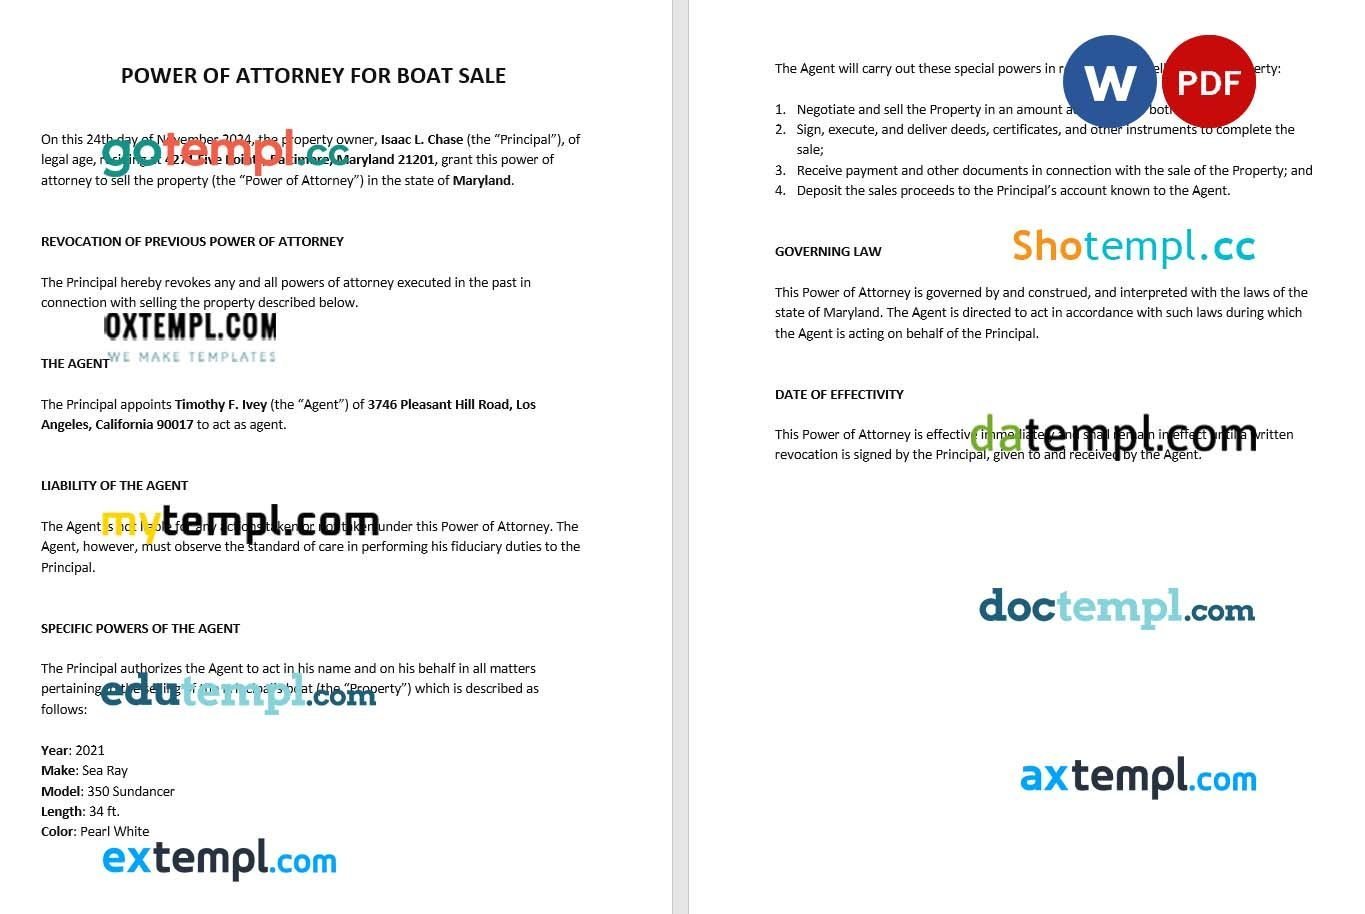 Power of Attorney for Boat Sale example, fully editable